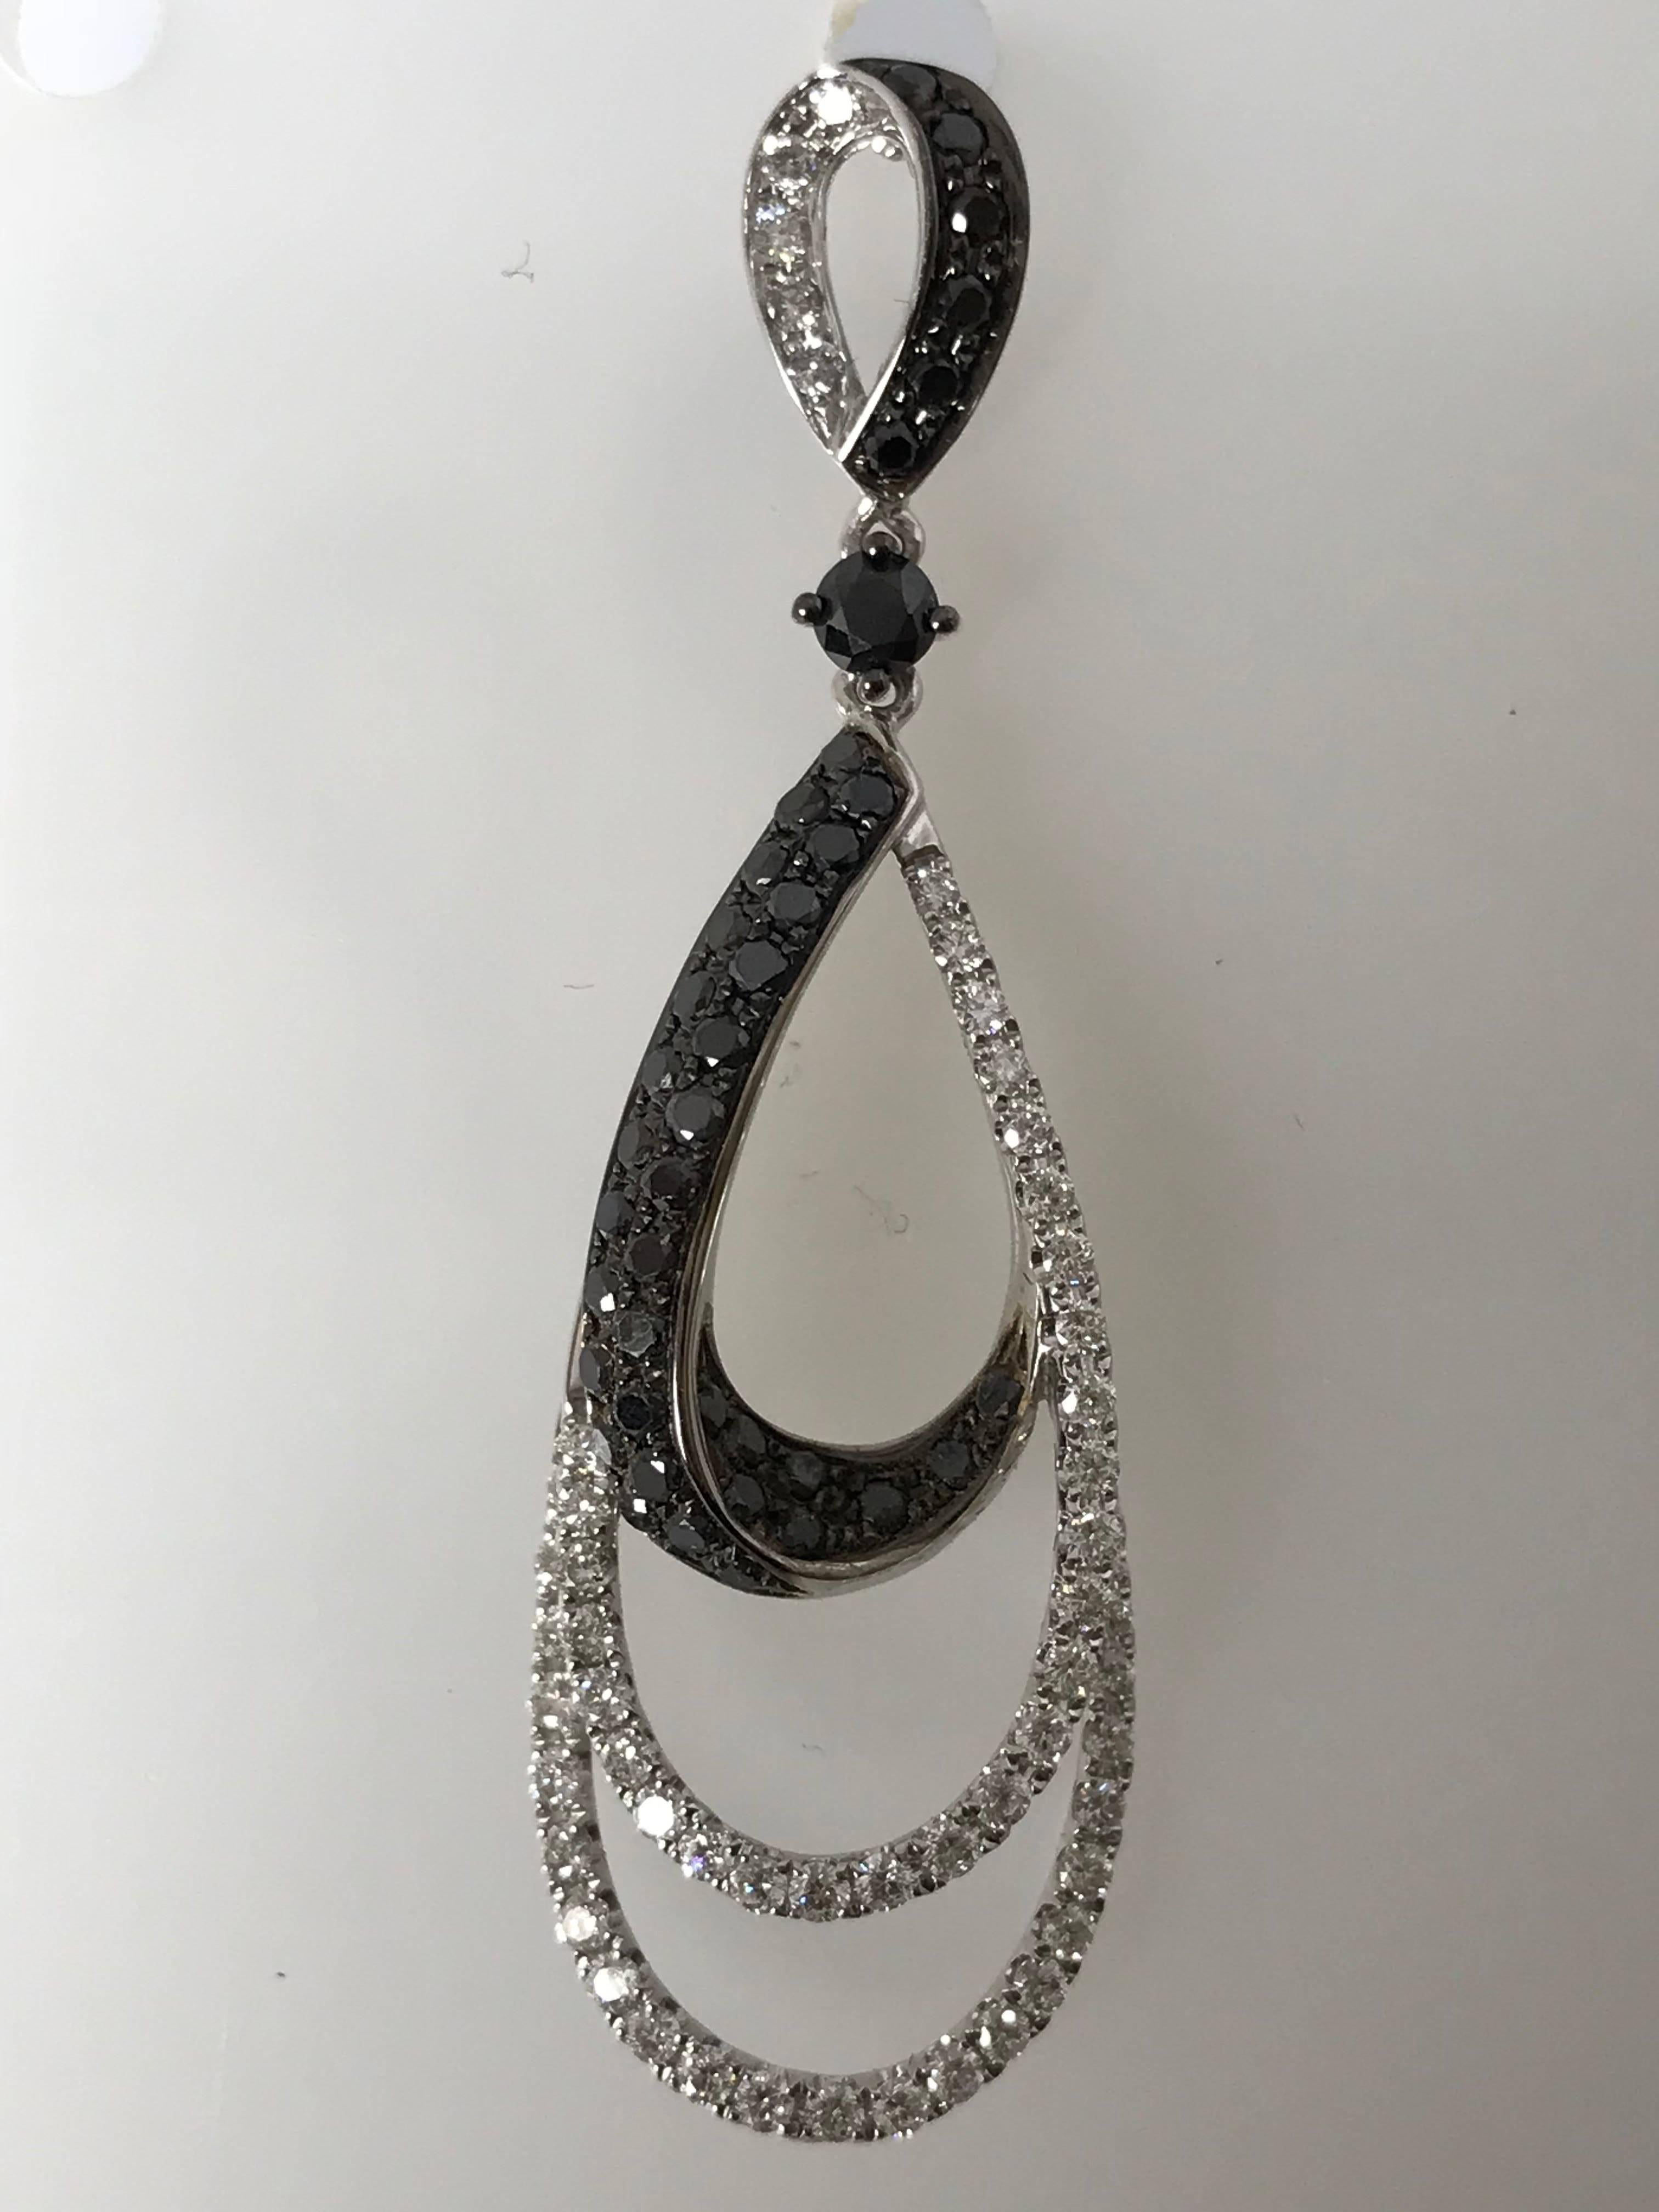 Handcrafted by a master jeweler in 18k white gold and 116 Diamonds 1.55 carats of round brilliant cut and 80 Black diamonds 1.69 cts perfectly matched, slightly graduated and secured with an attached backs.
This gorgeous twisted diamond earrings